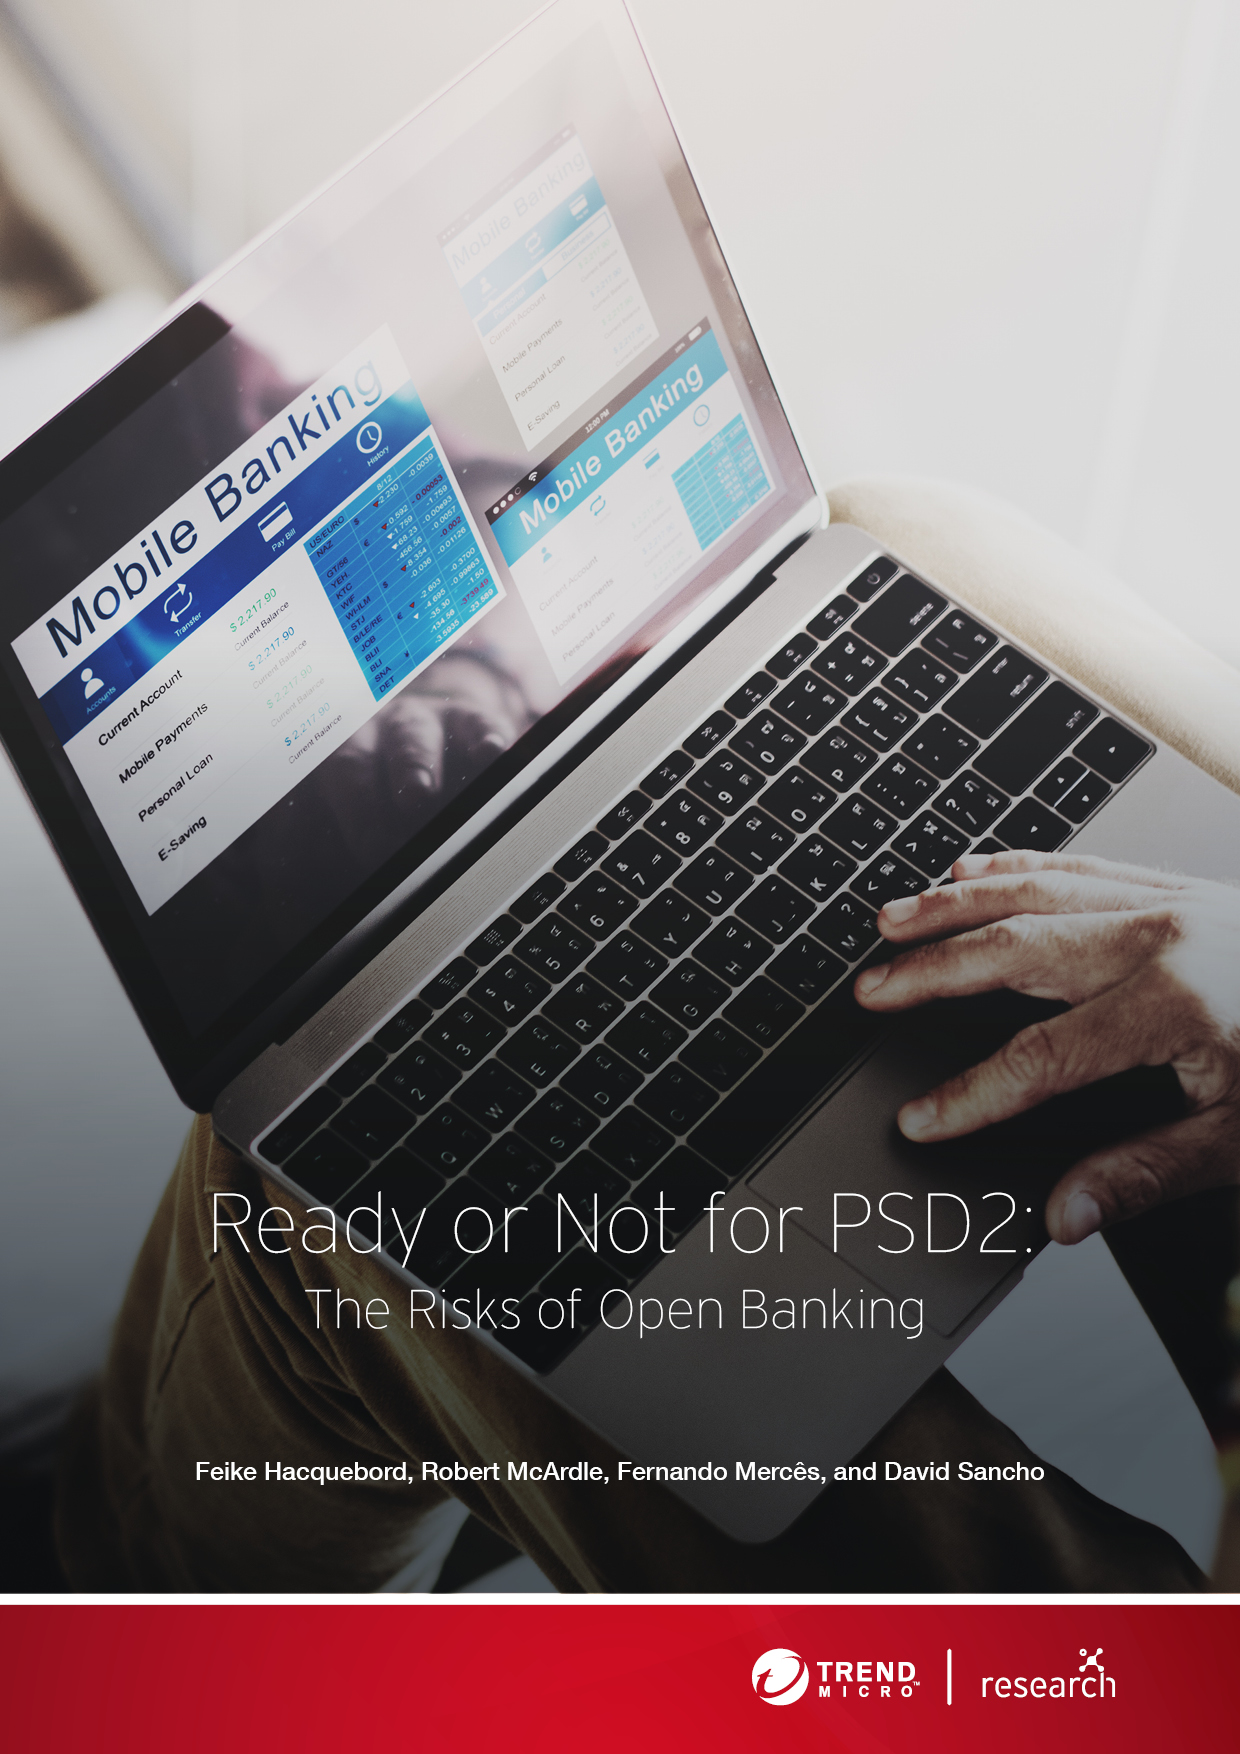 Ready or Not for PSD2: The Risks of Open Banking